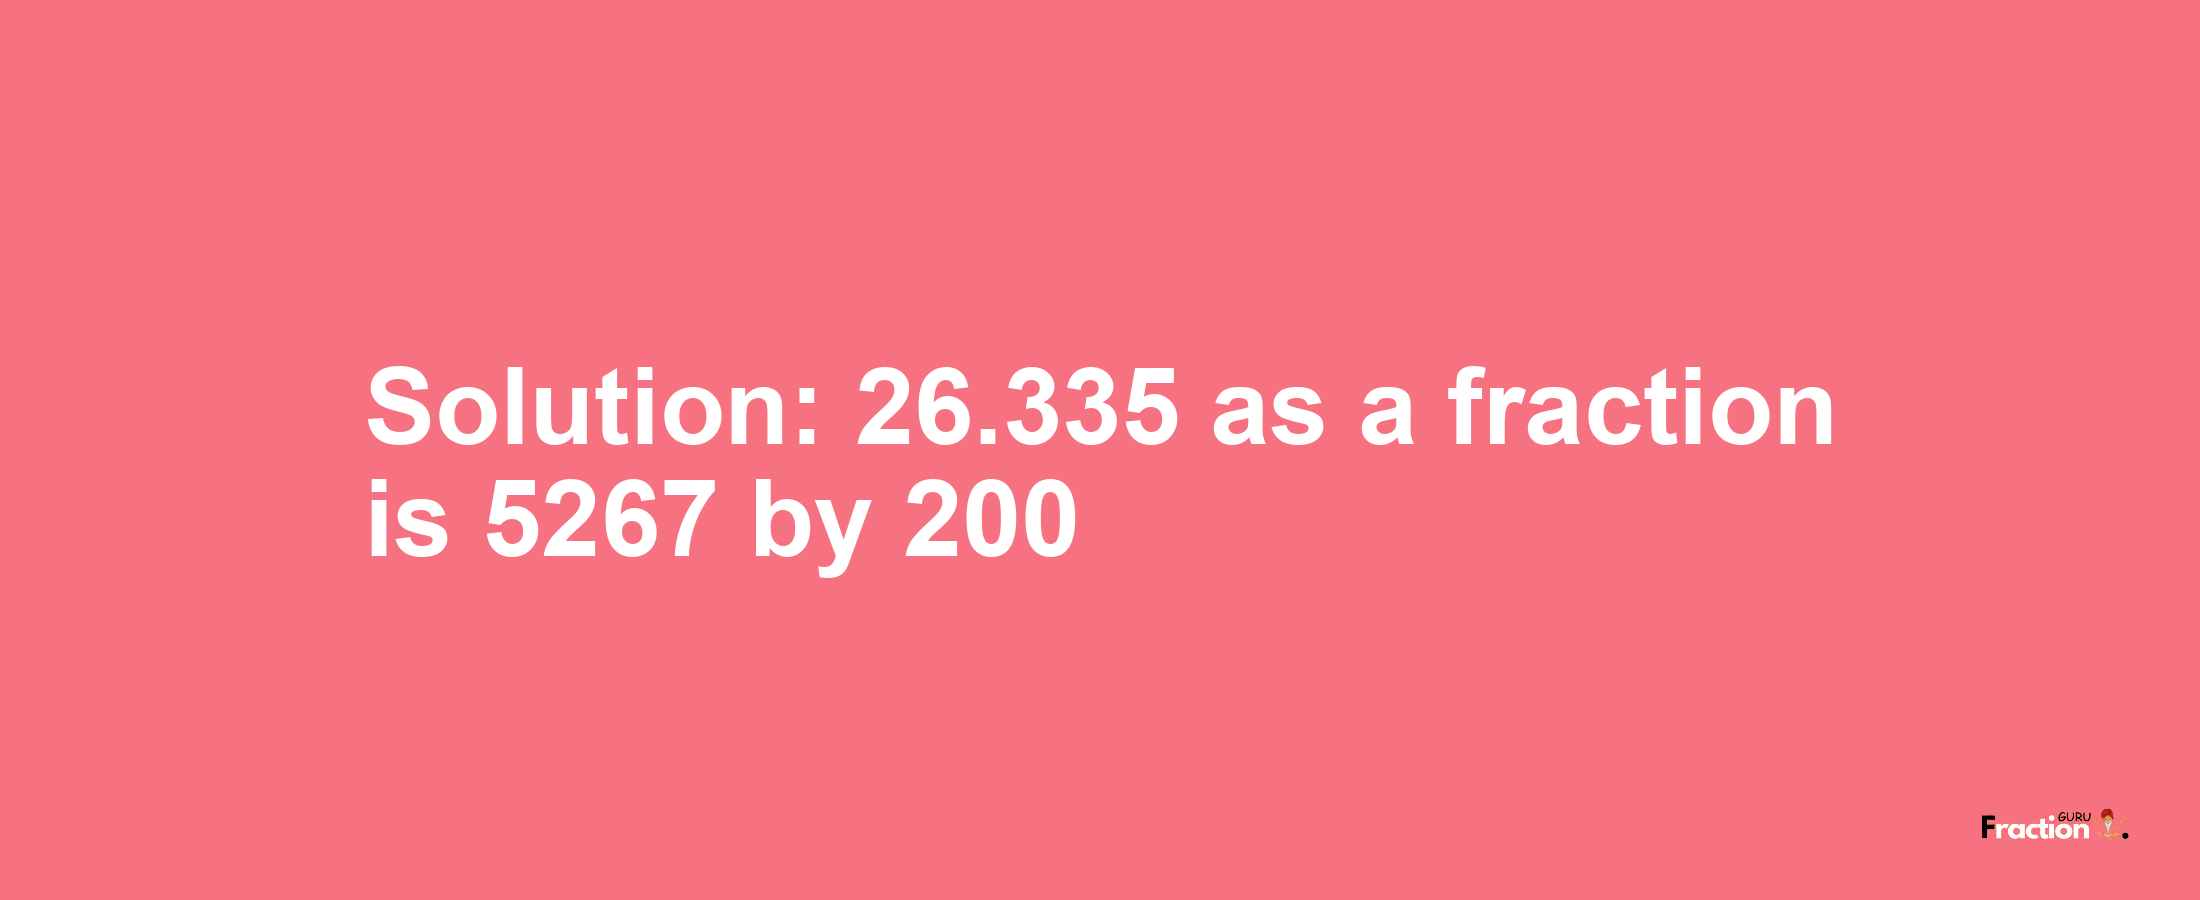 Solution:26.335 as a fraction is 5267/200